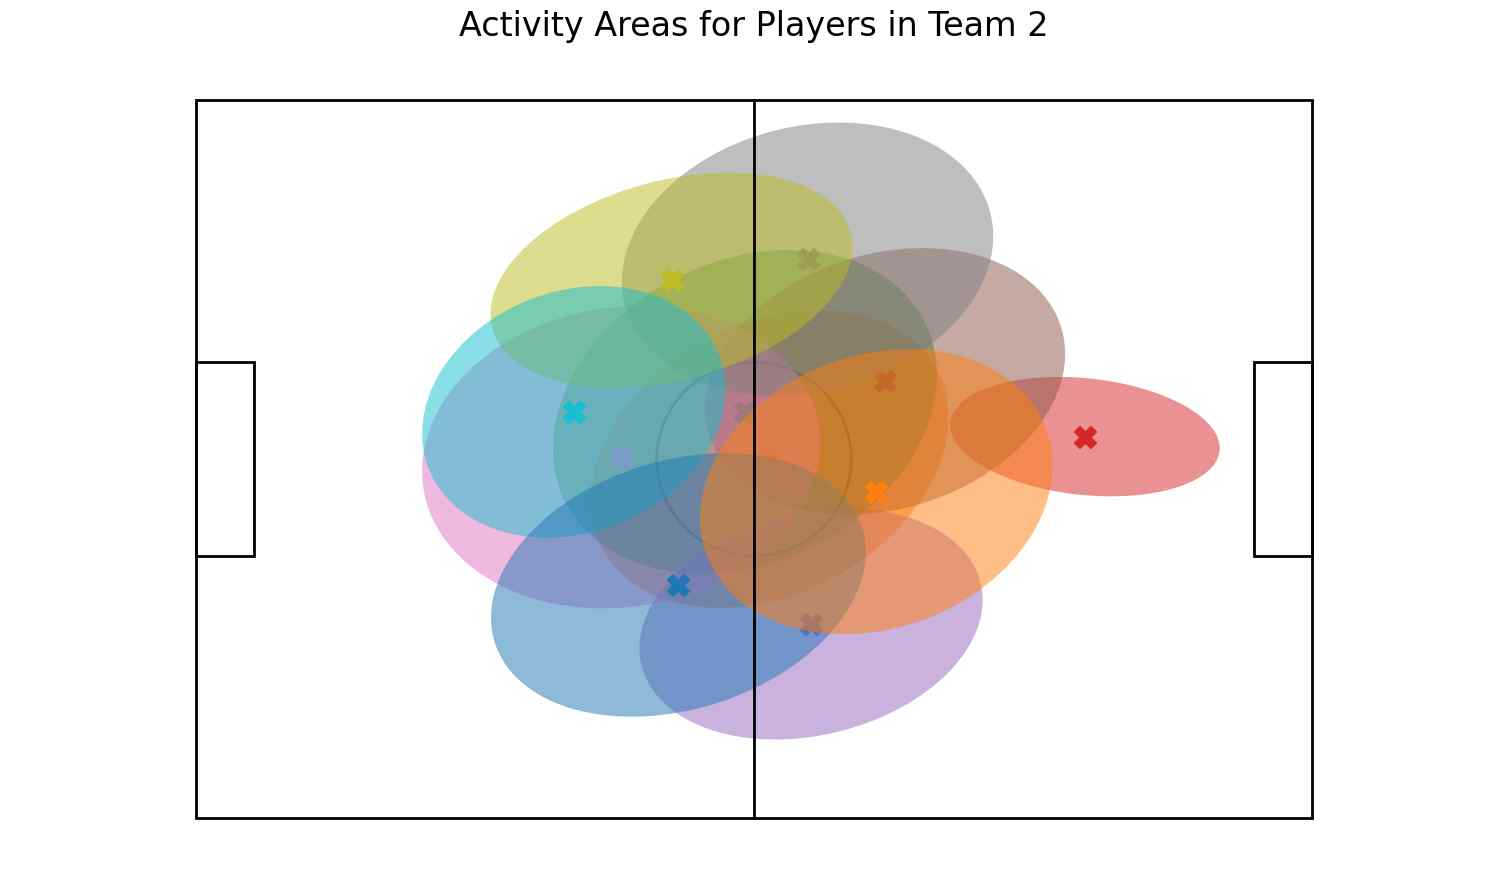 A top-view diagram of a soccer field with ellipses representing the activity areas of different players in Team 2 during a 30-minute match.